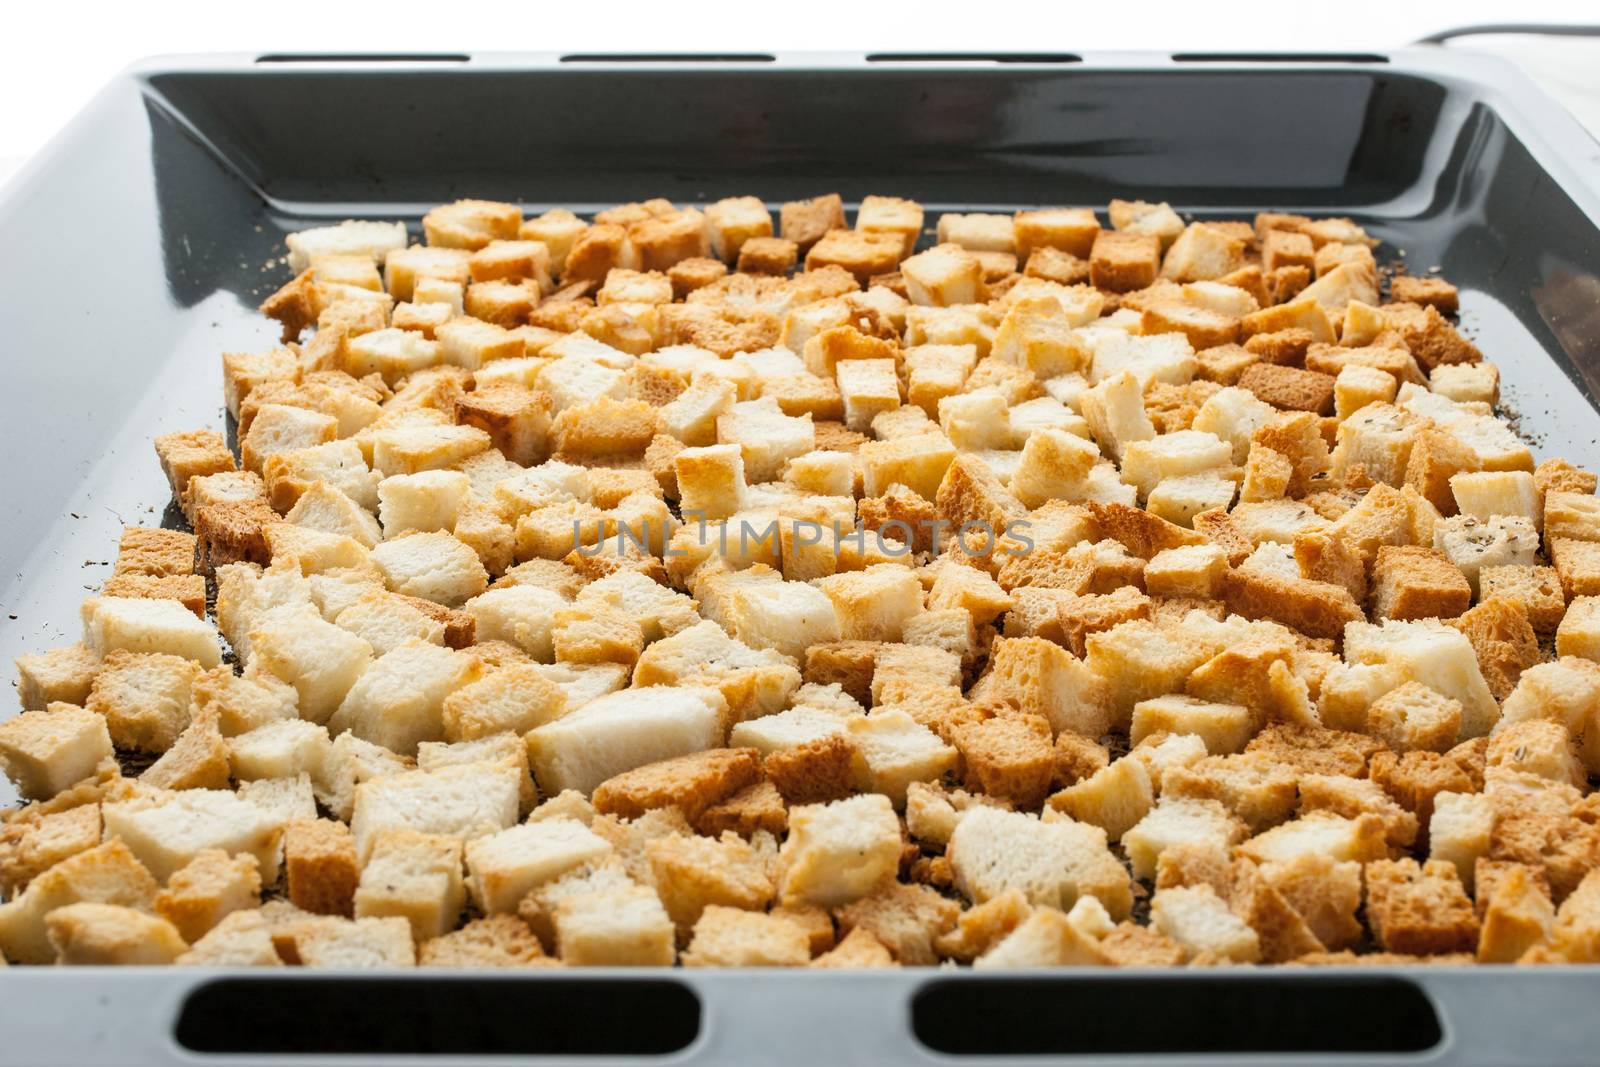 Small croutons on a baking tray by Deniskarpenkov